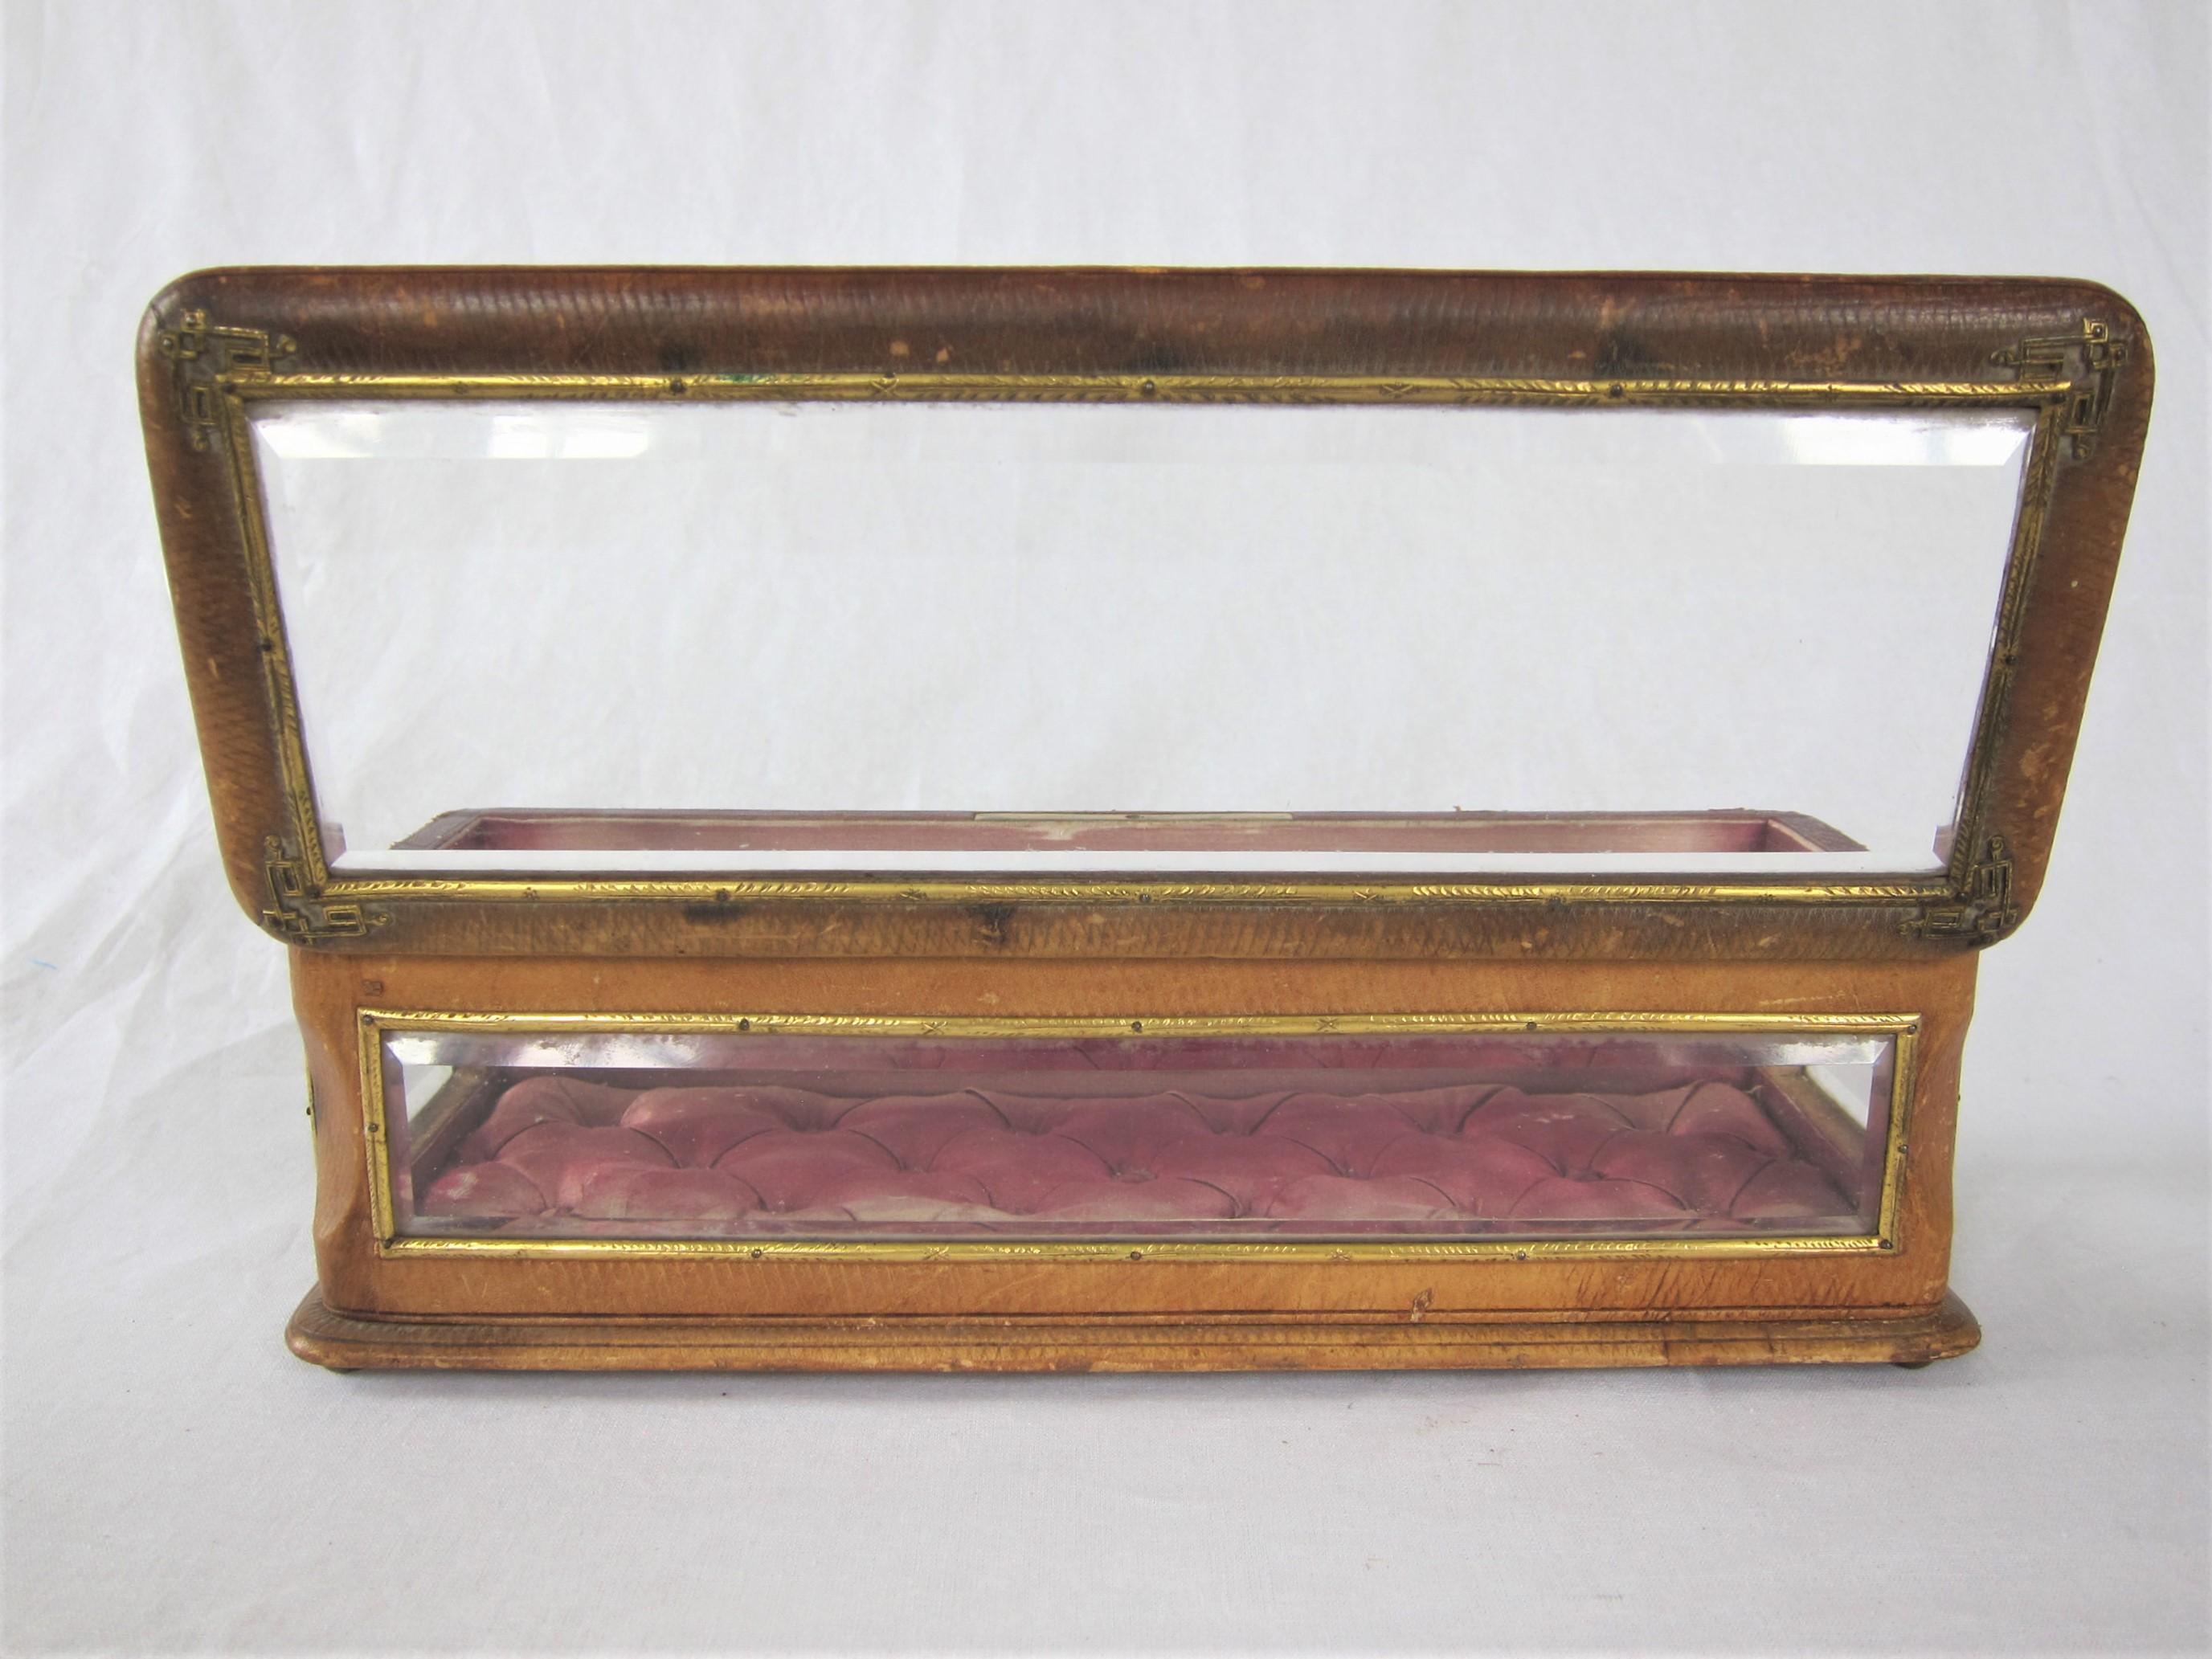 Art Nouveau 19th Century Antique French Glass and Leather Jewelry Box For Sale